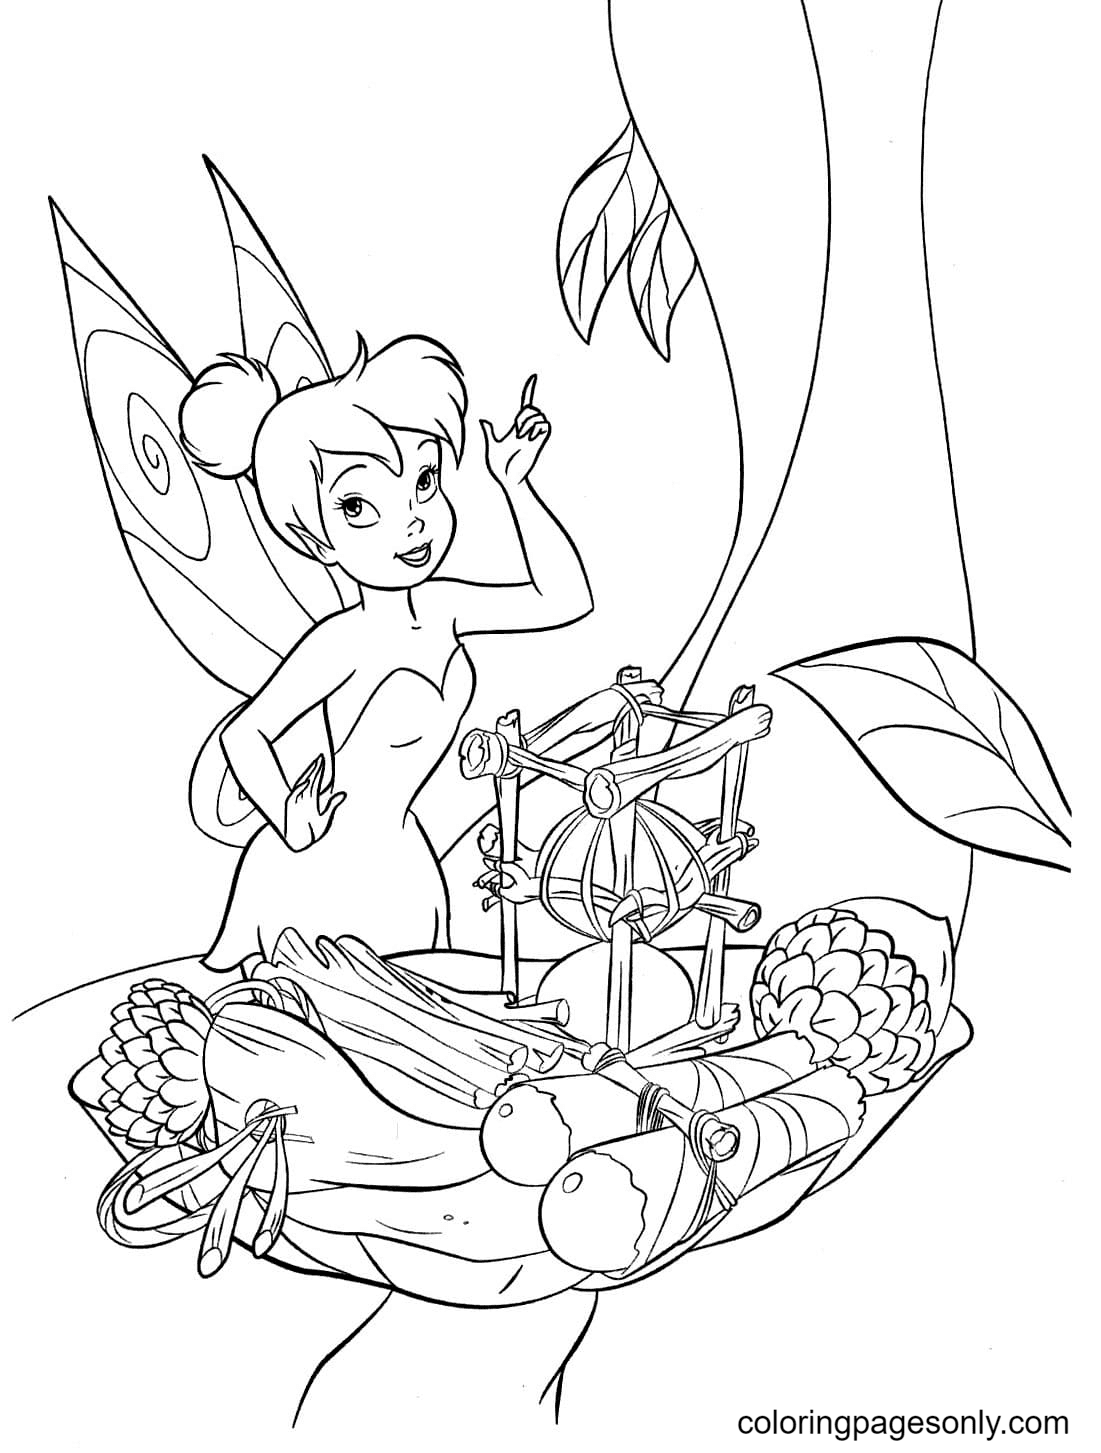 Fairy Tinkerbell Coloring Pages